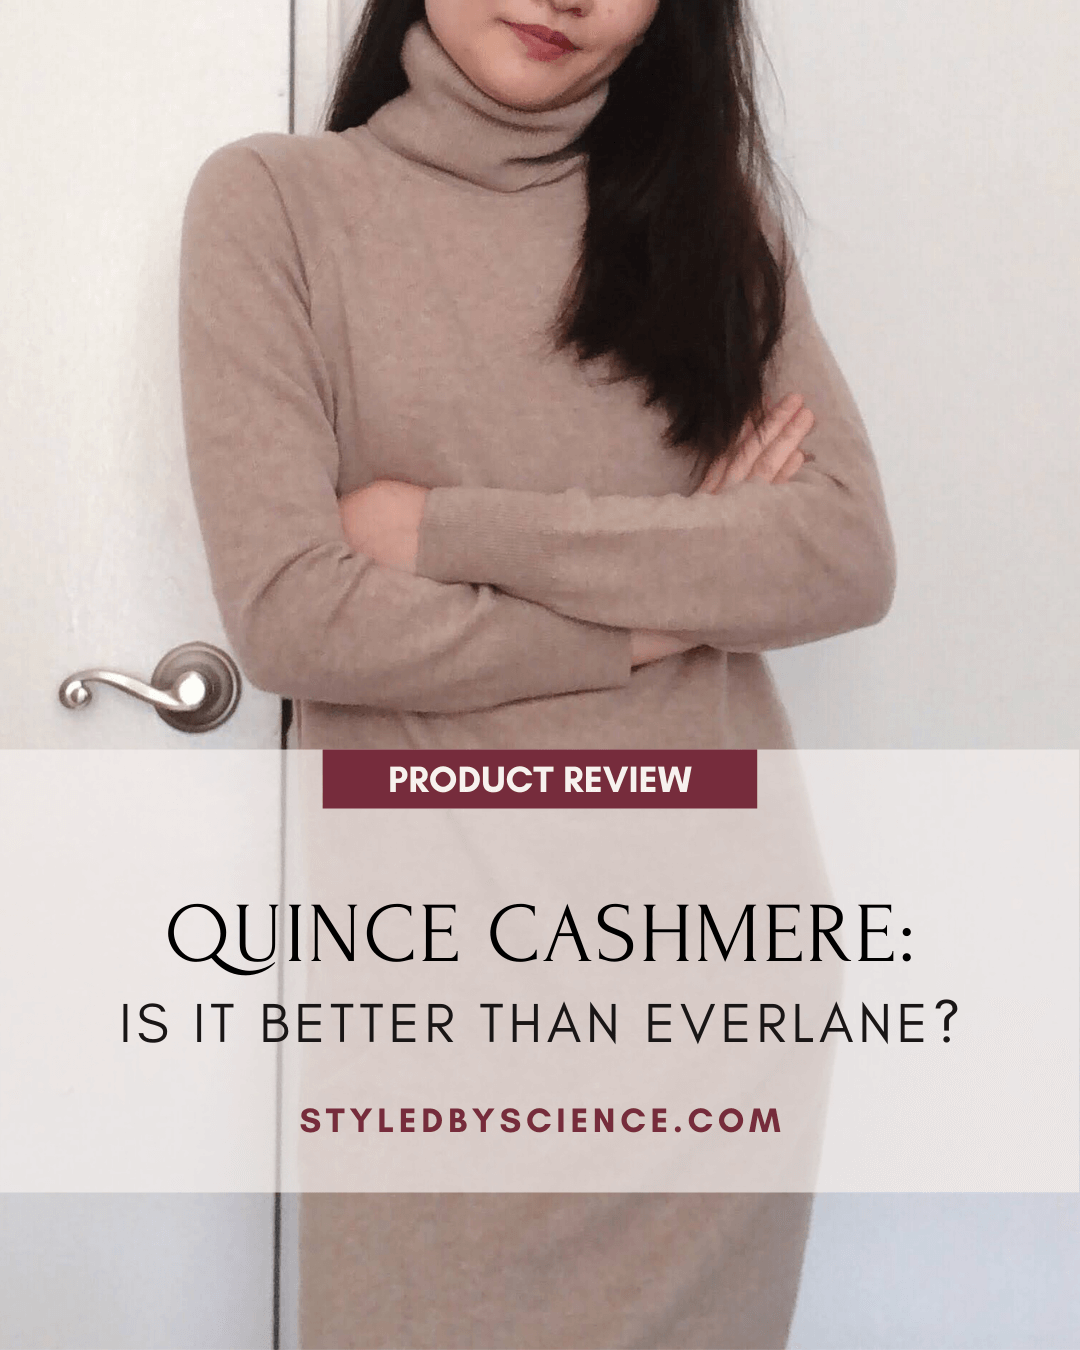 My Honest Quince Review - Is it good quality?